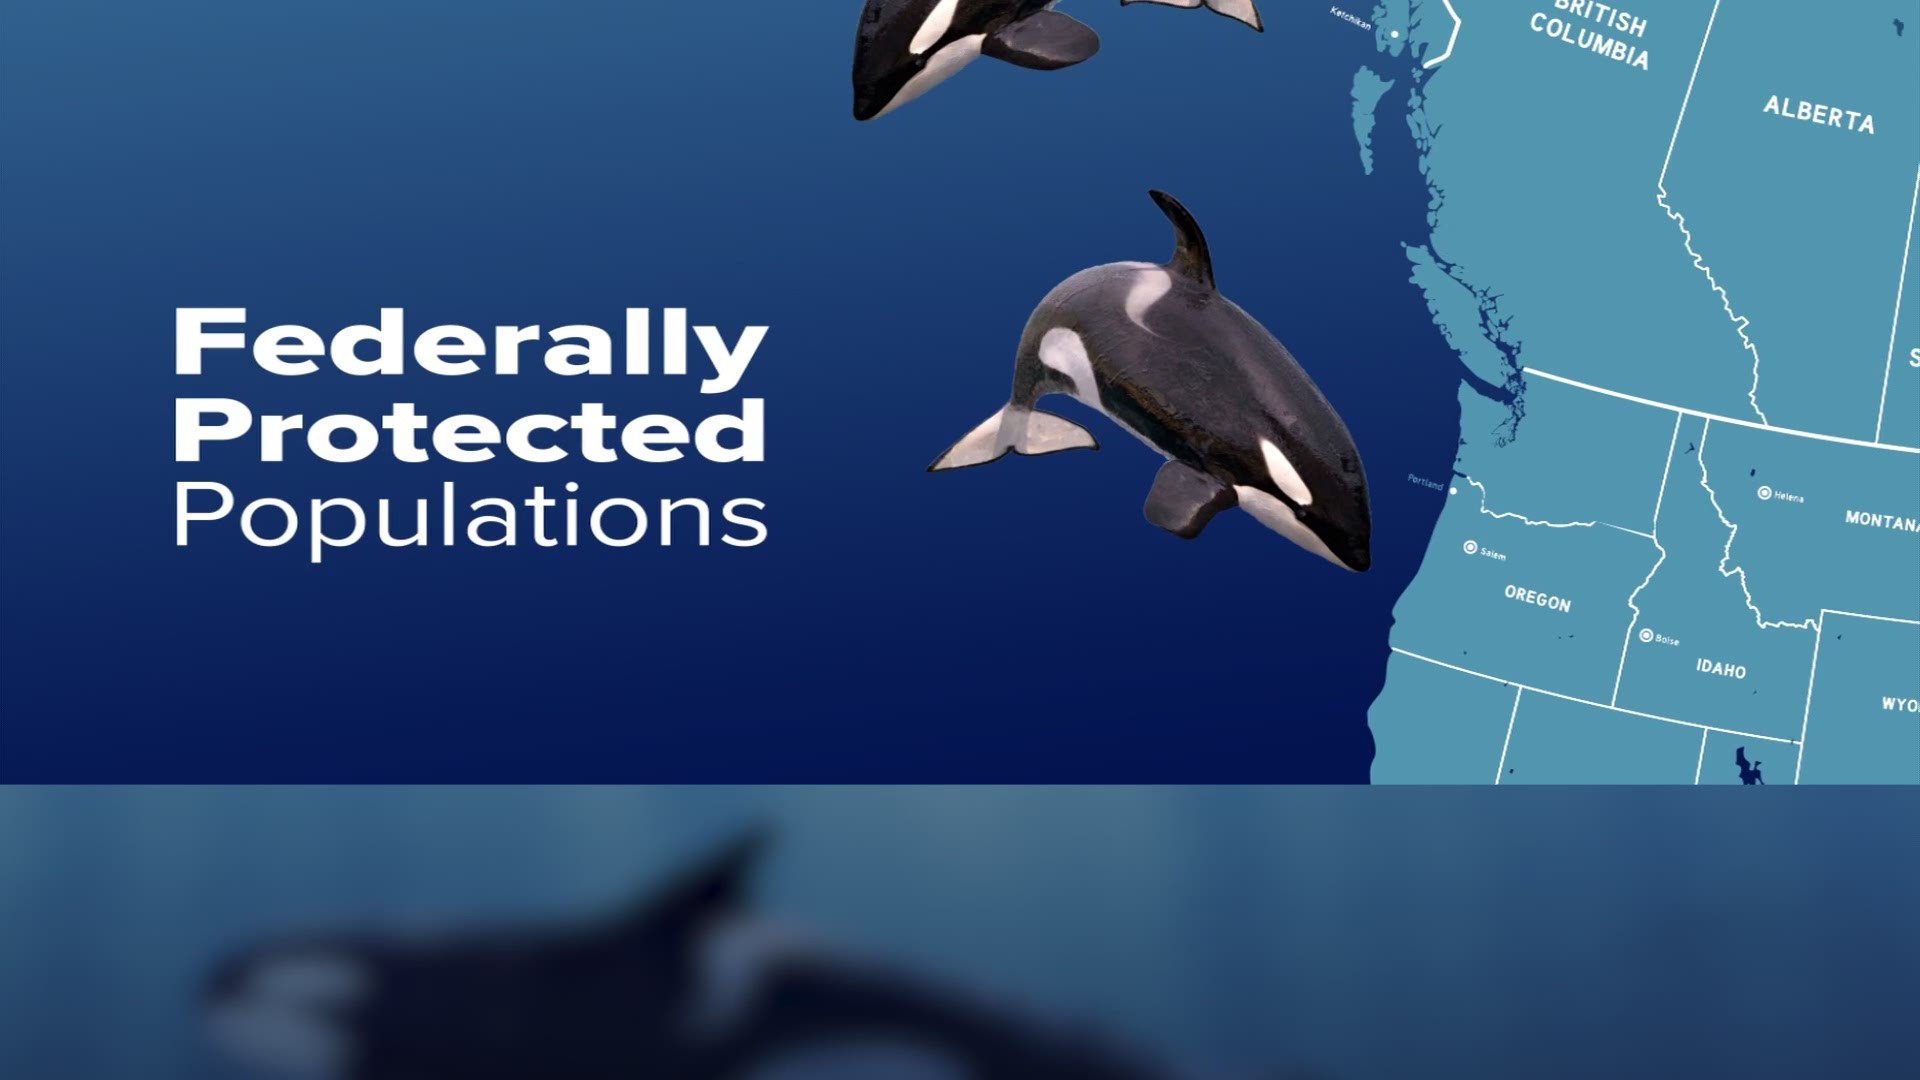 There are just 73 Southern Resident killer whales left in the wild as of August 2019. Three more orcas were declared dead by the Center for Whale Research on August 6. The orca population has dwindled in recent years based on several factors: boat noise, reduced food supply, and contaminants in the water.